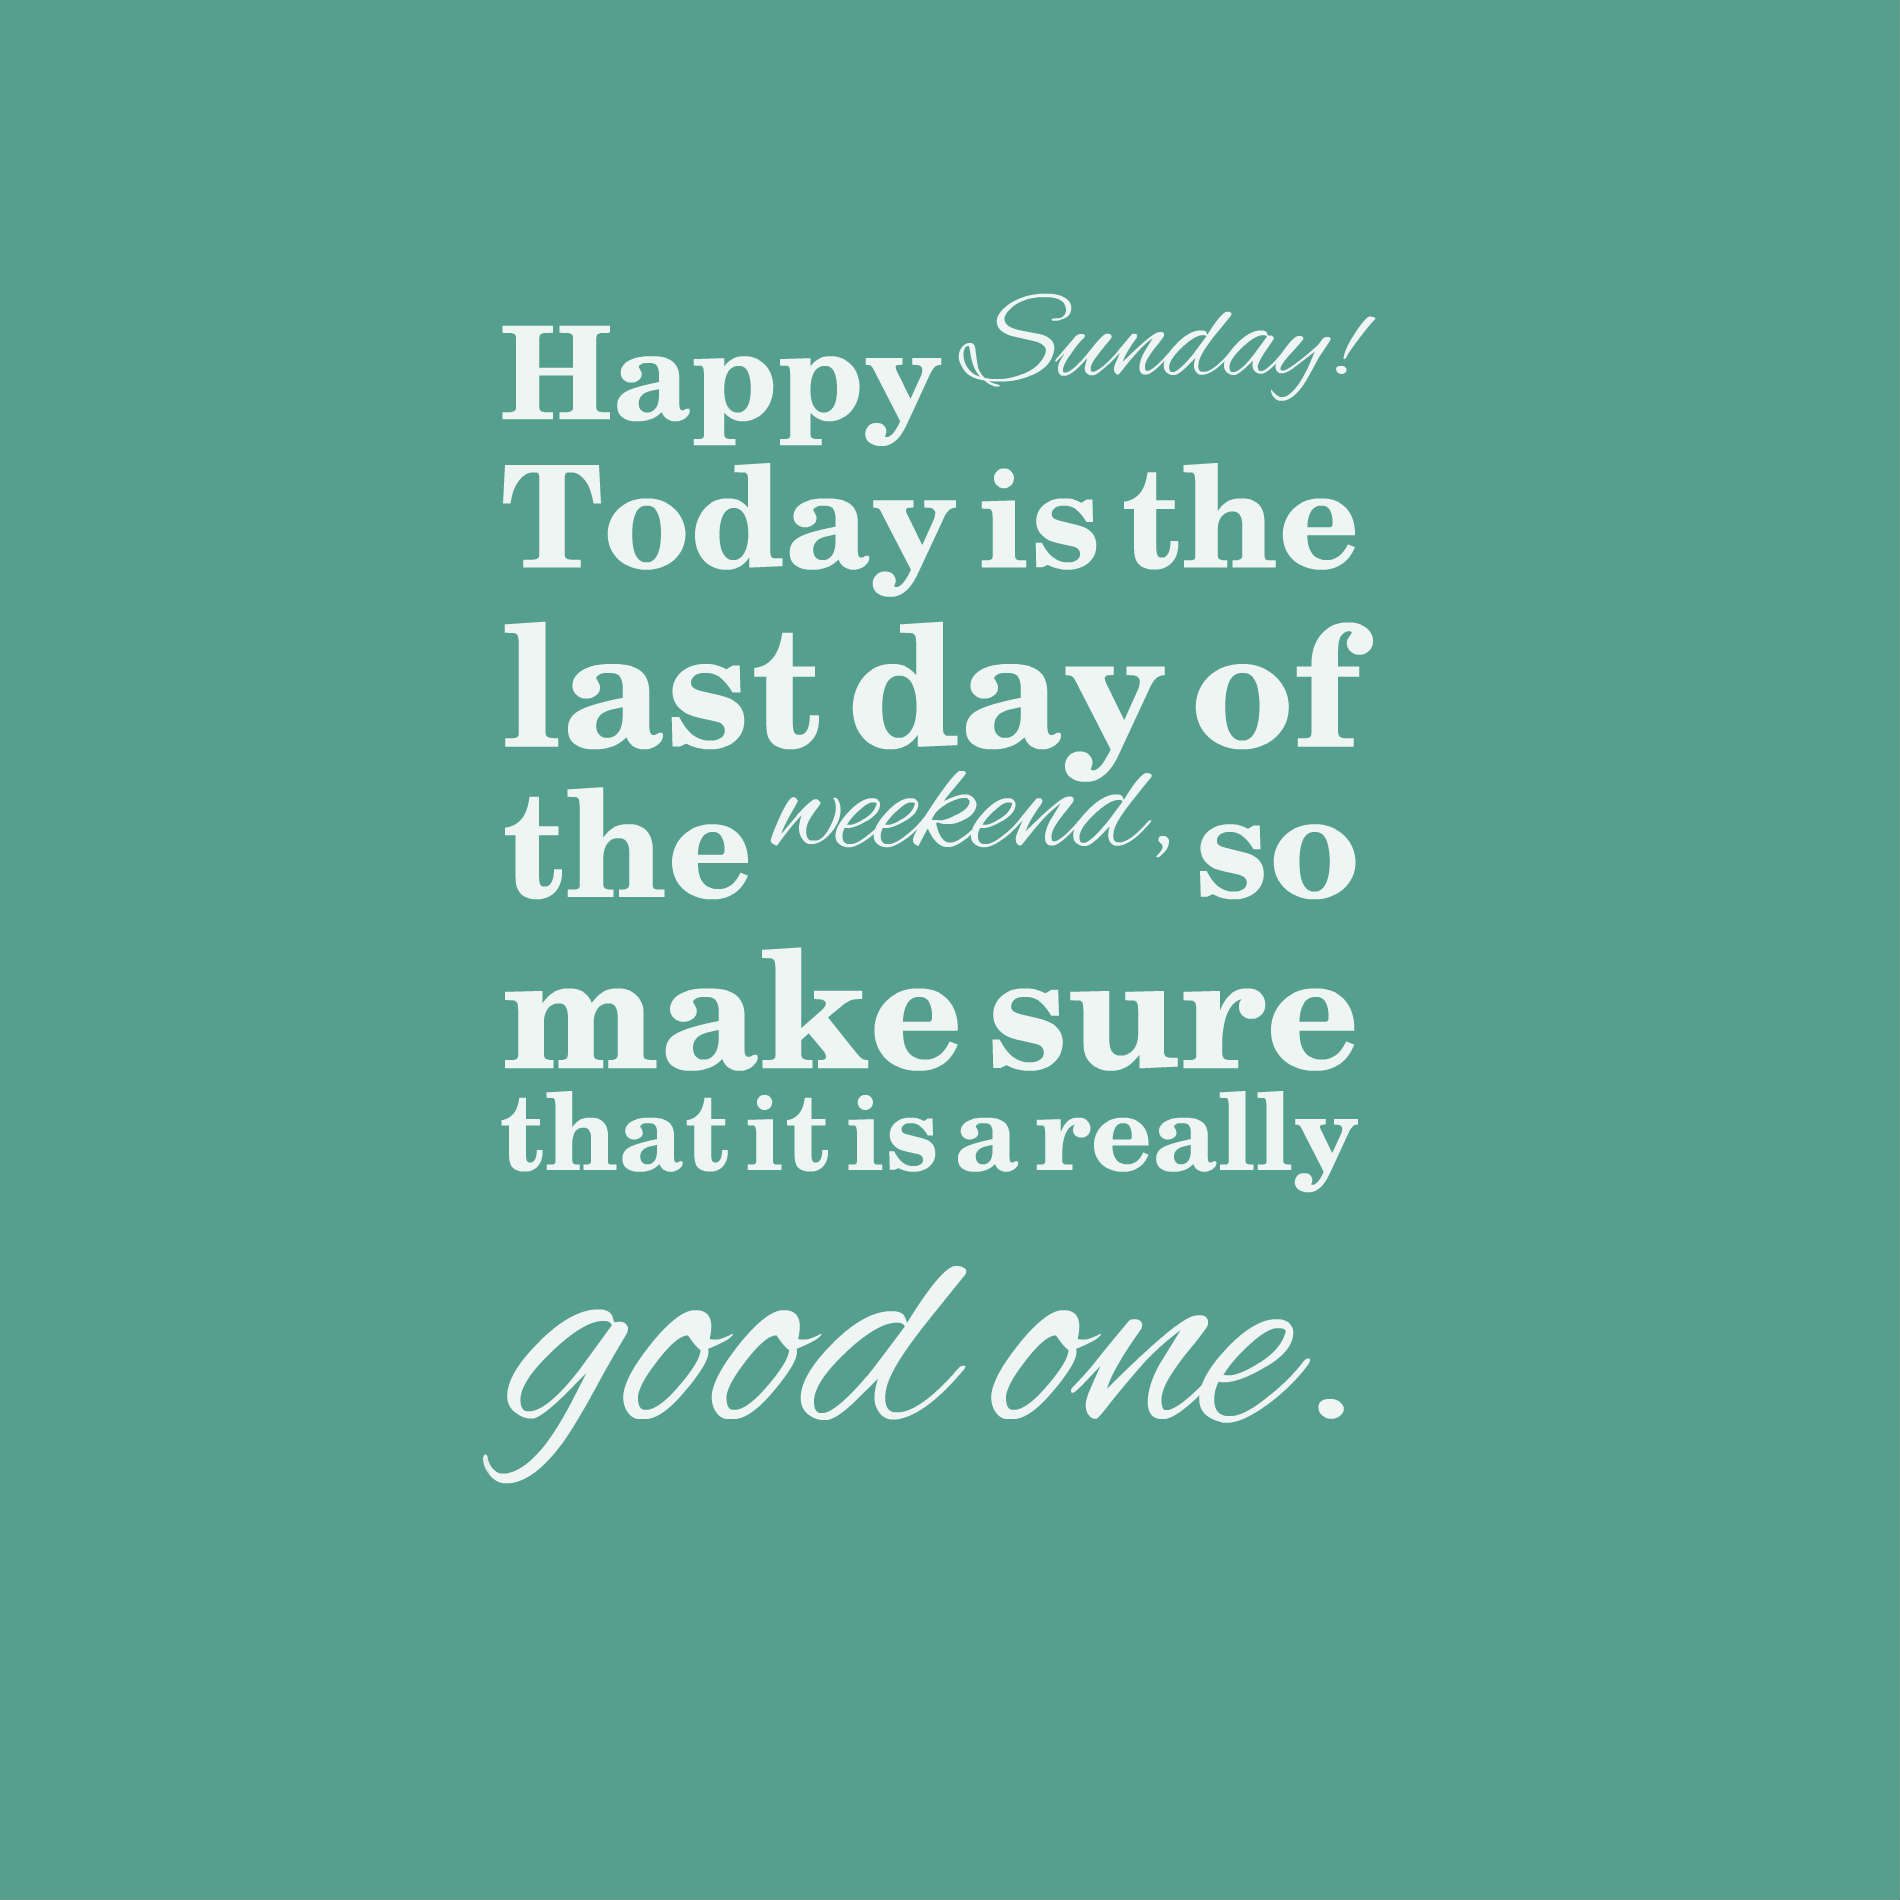 Today is the last day of the weekend, so make sure that it is a really good one.